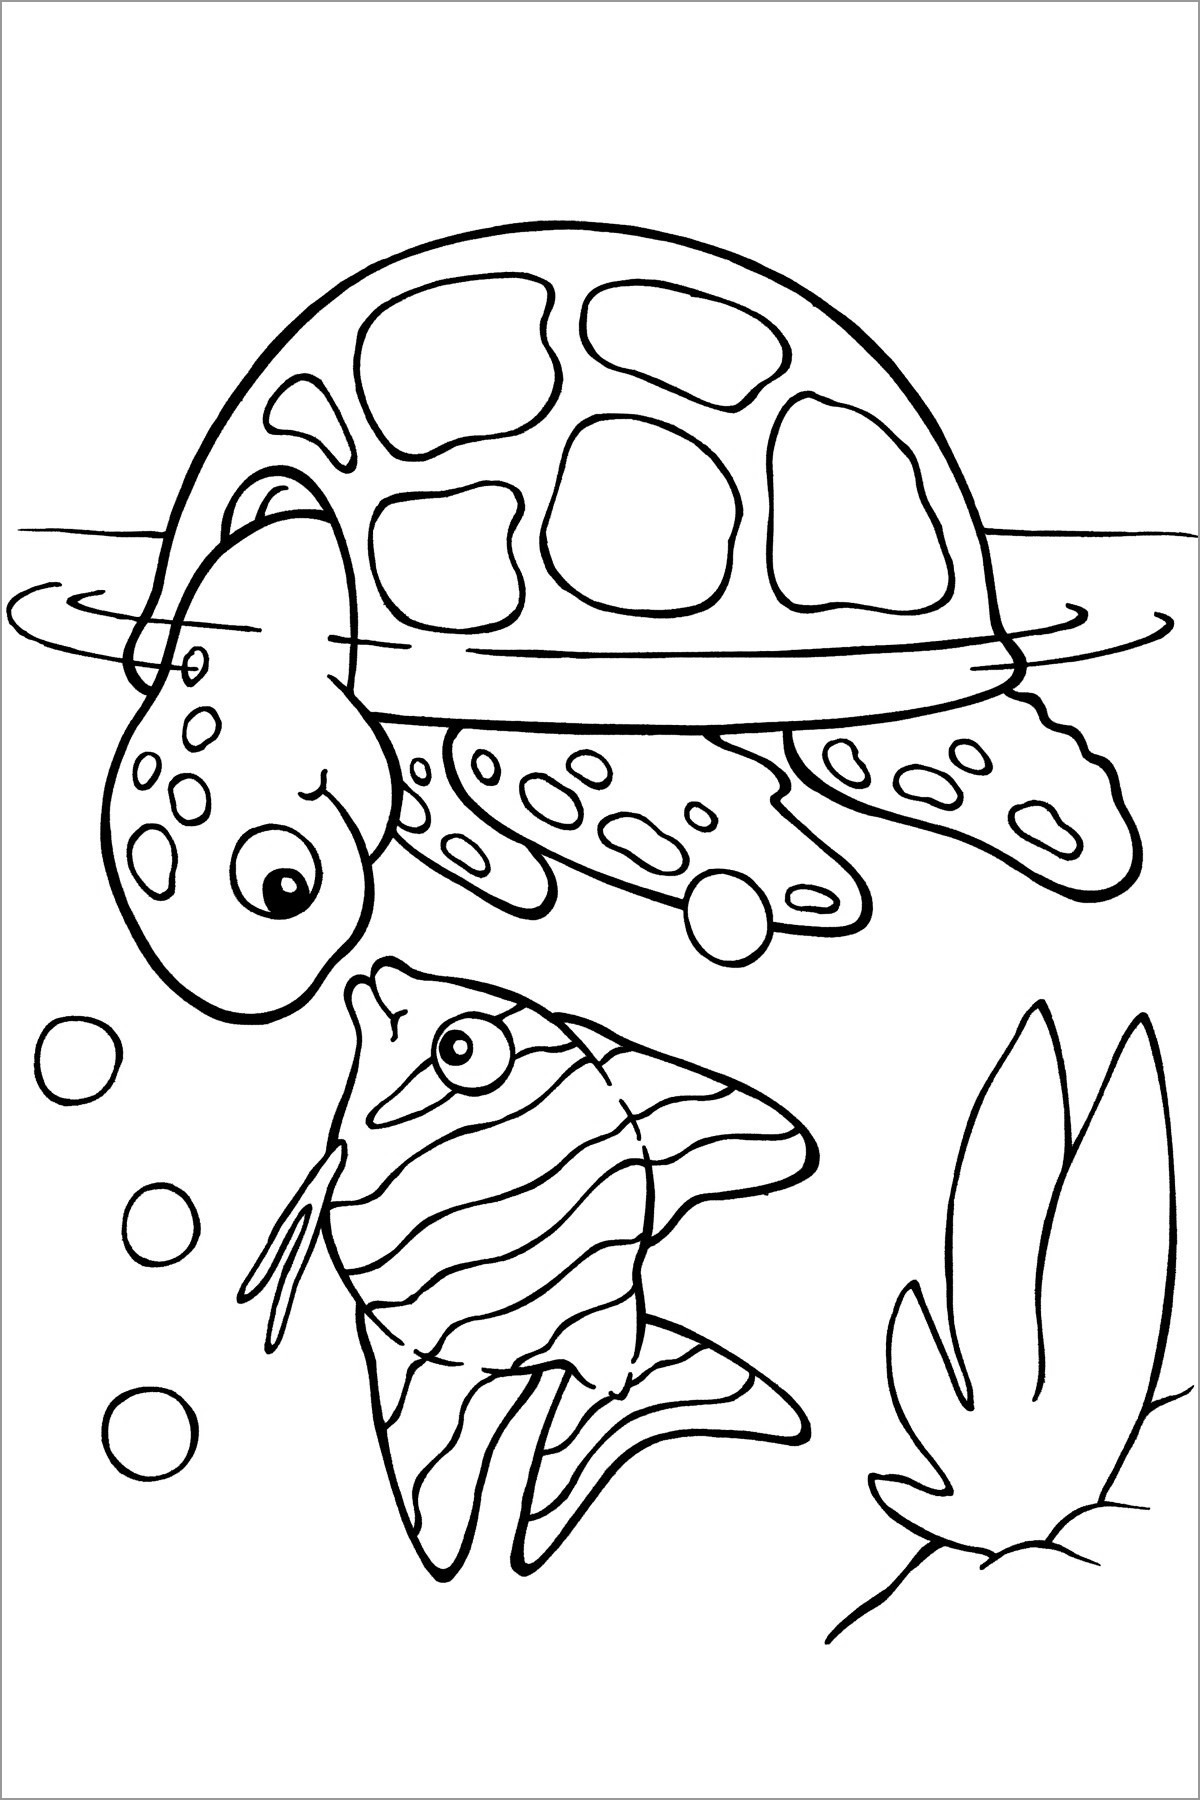 Printable tortoise Coloring Page